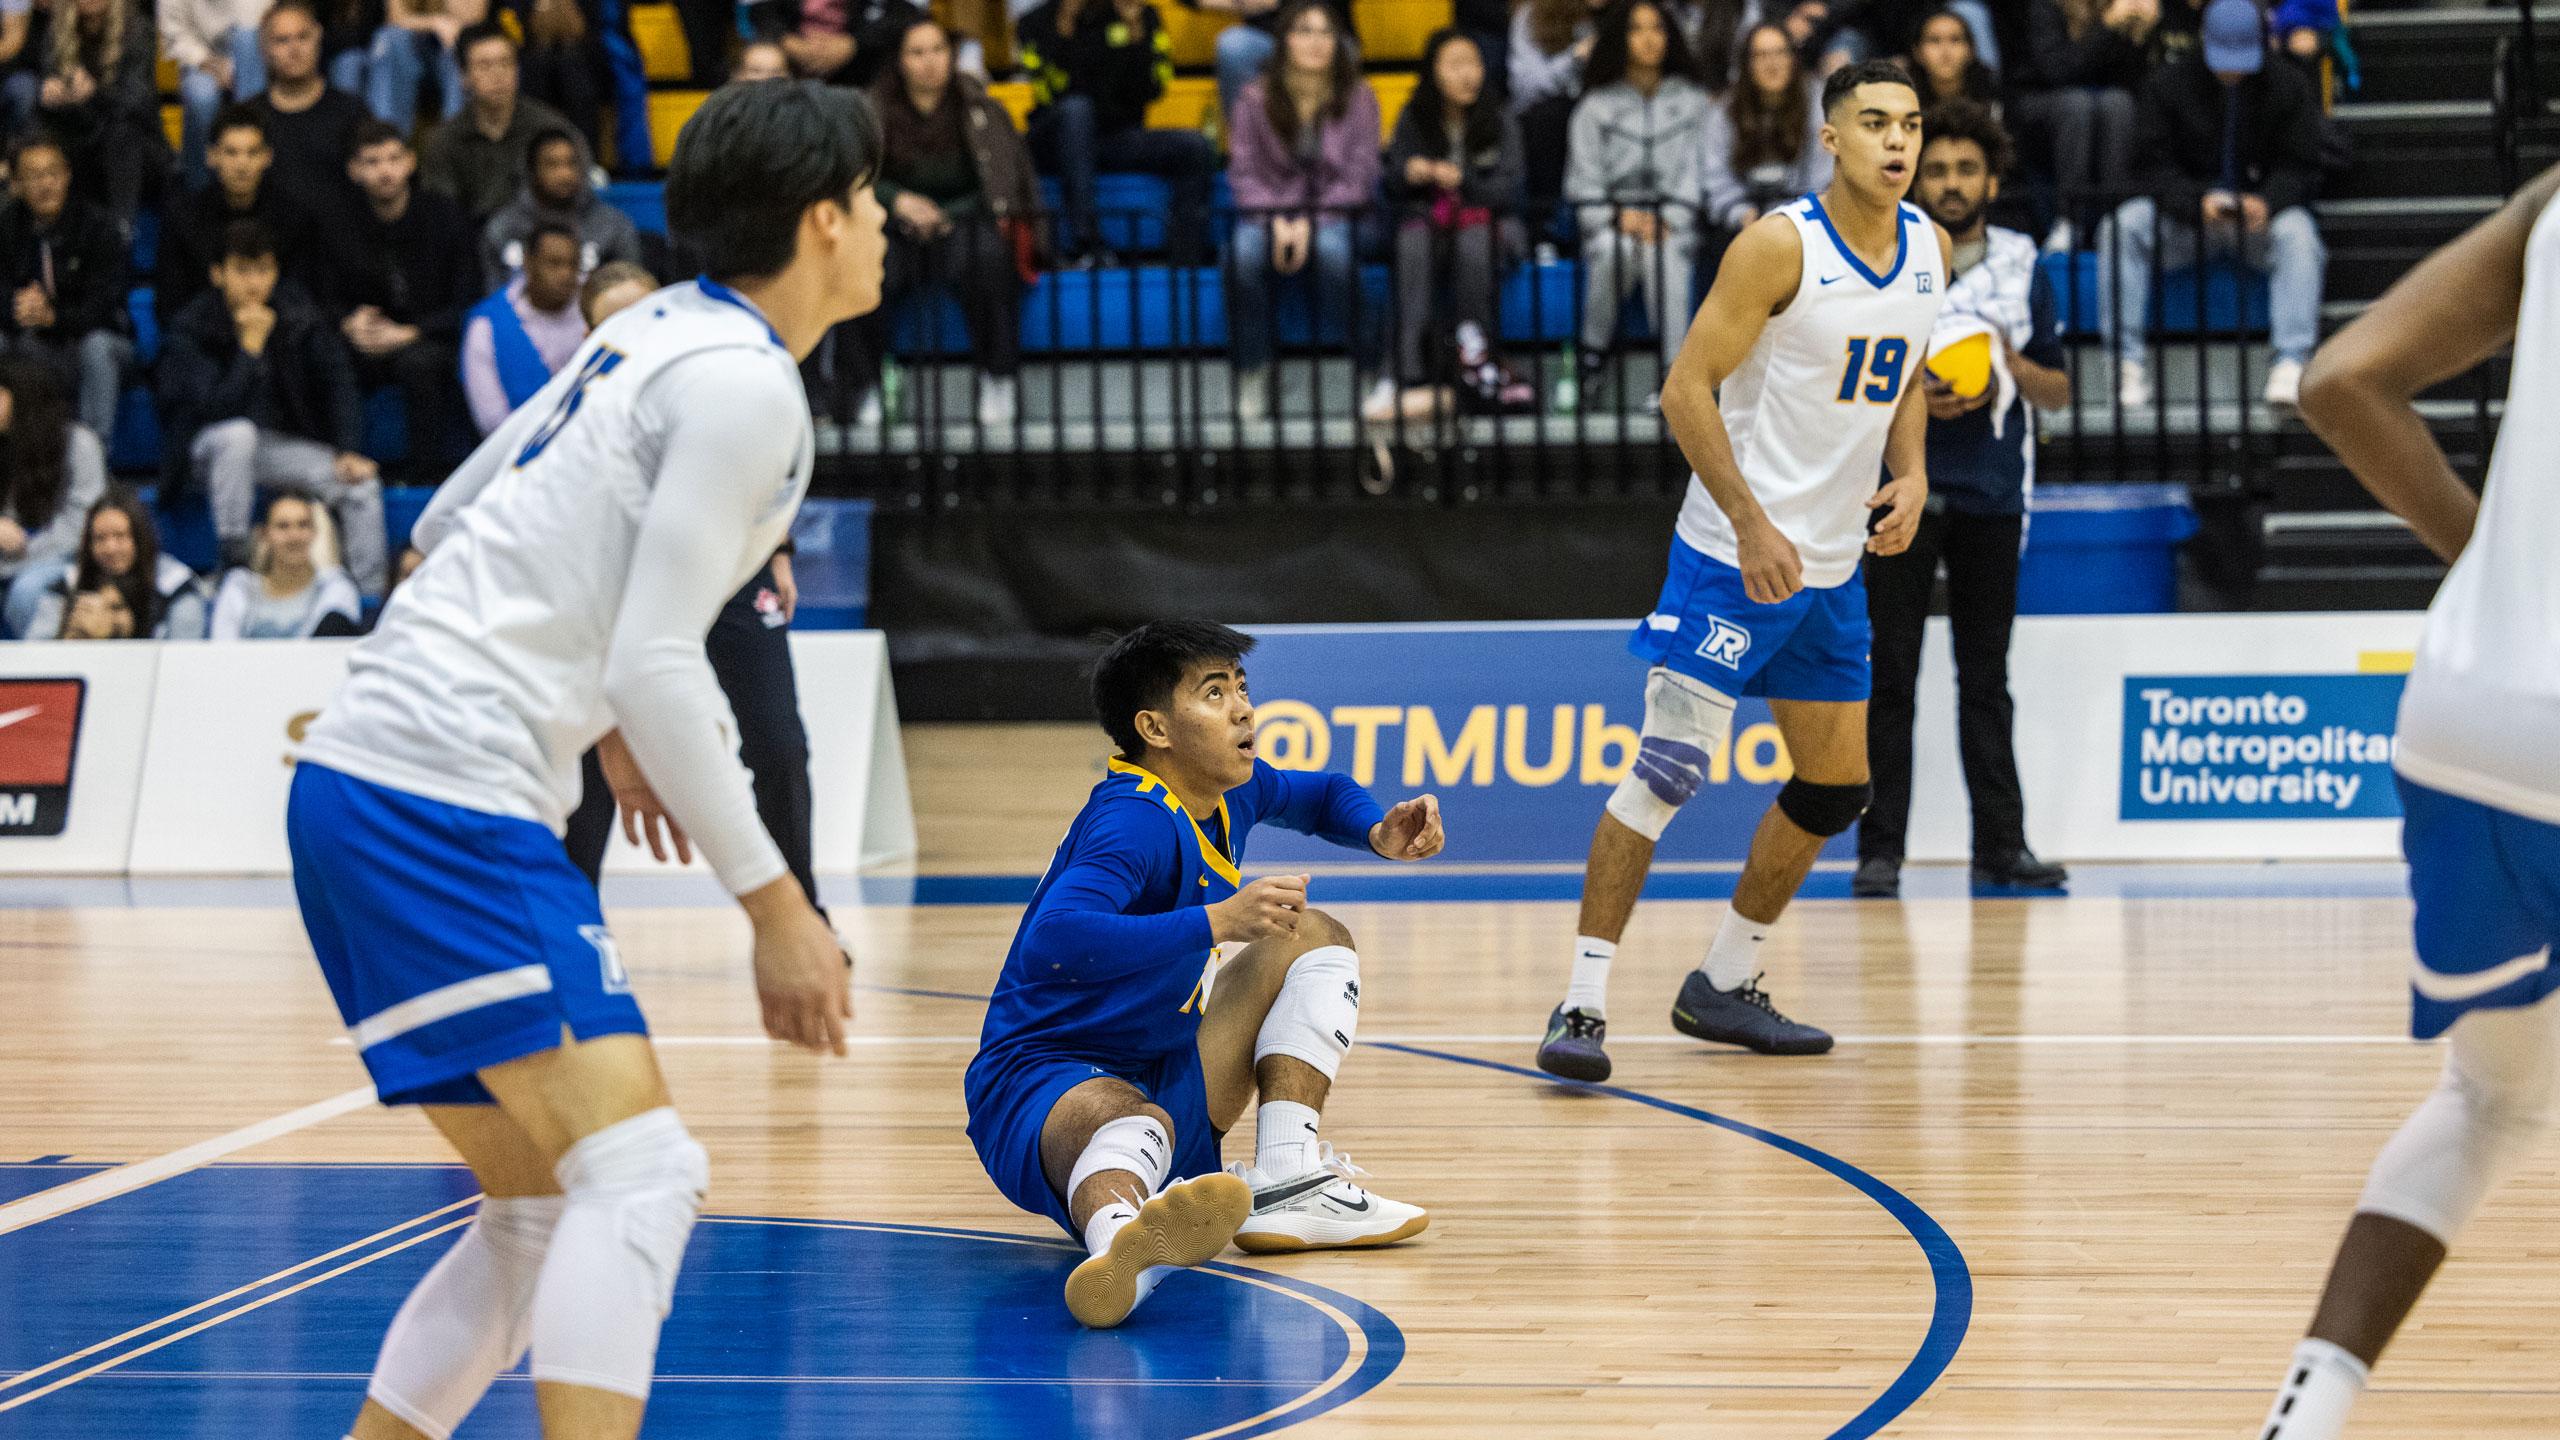 Three TMU men's volleyball players in white and blue jerseys look towards the ball in the air